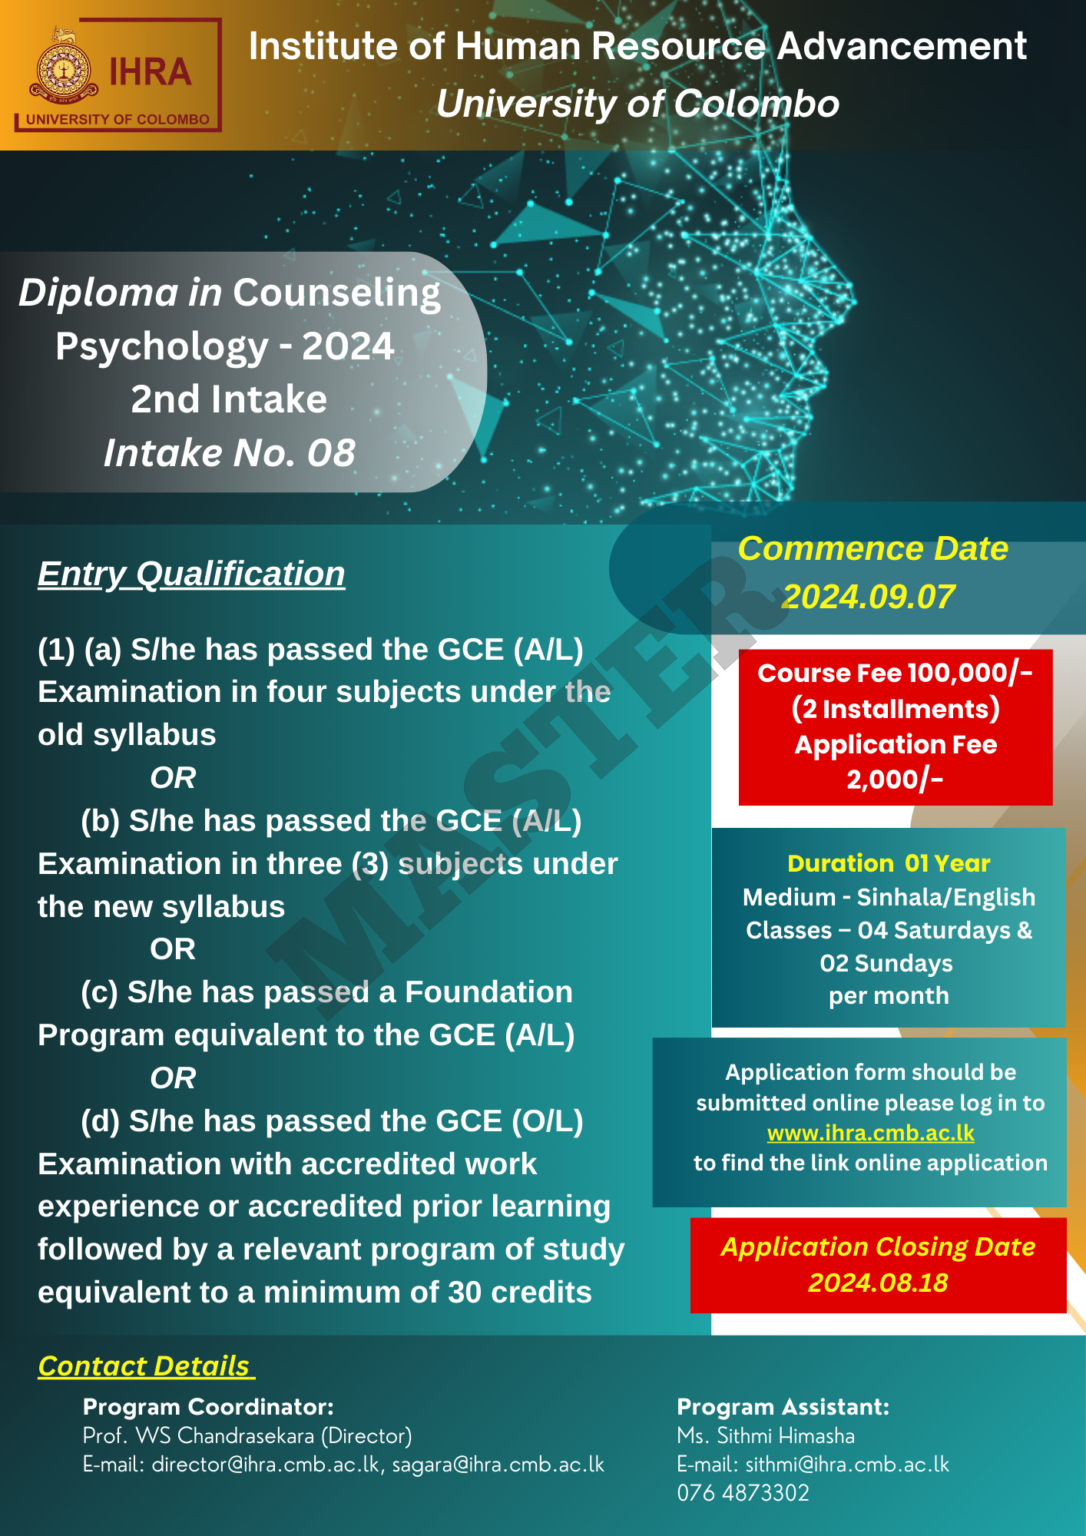 Diploma in Counseling Psychology - University of Colombo